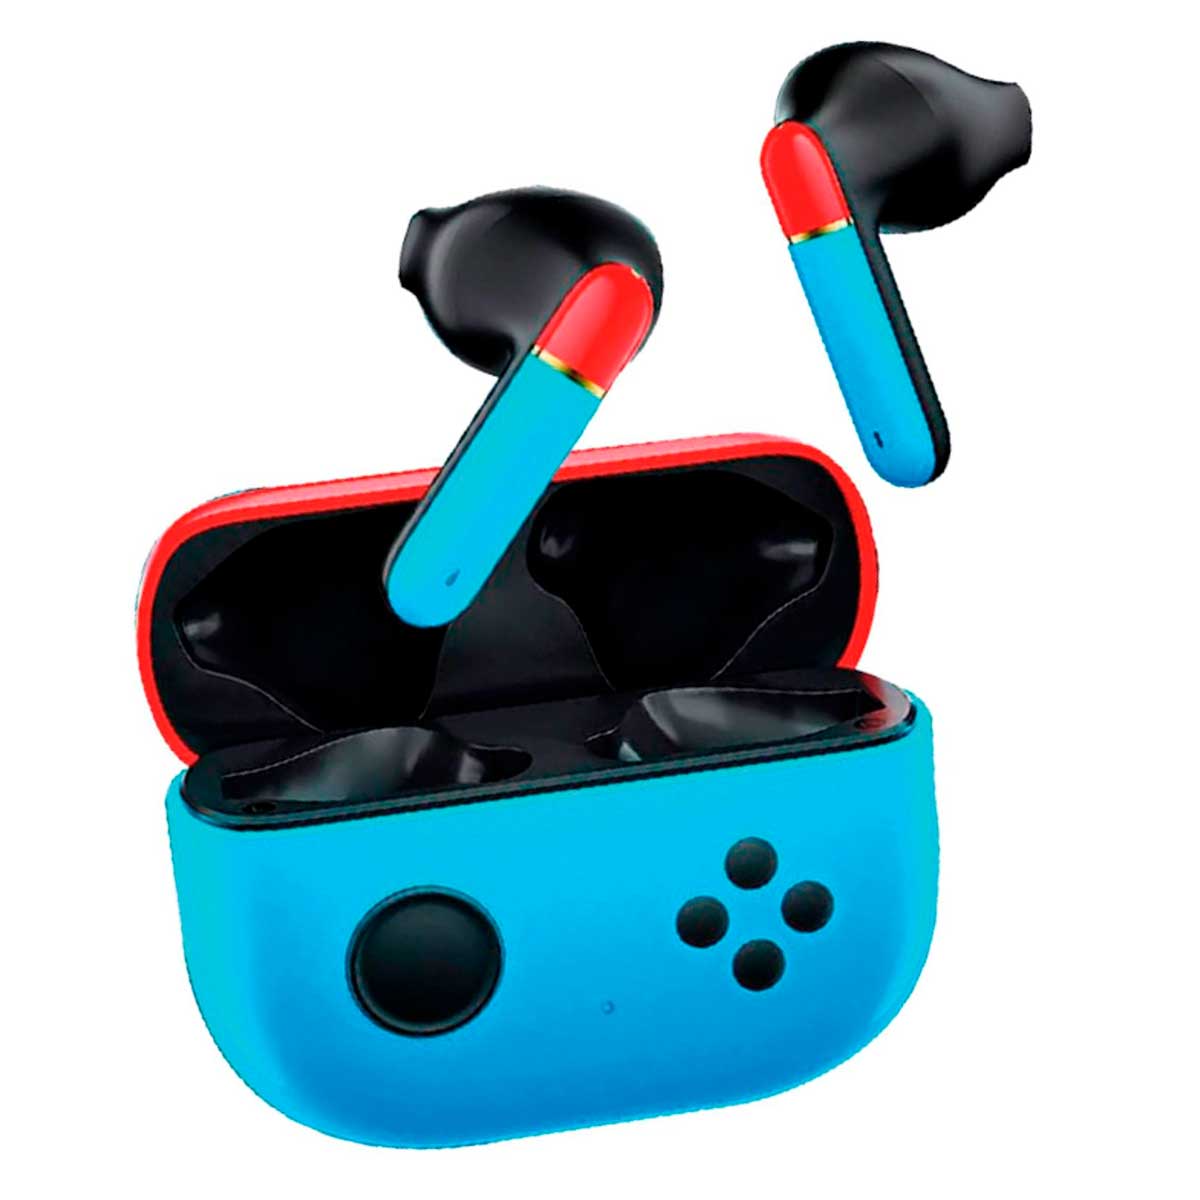 Consola Nintendo Switch OLED Neon Blue/Red - Mario Kart 8 Deluxe